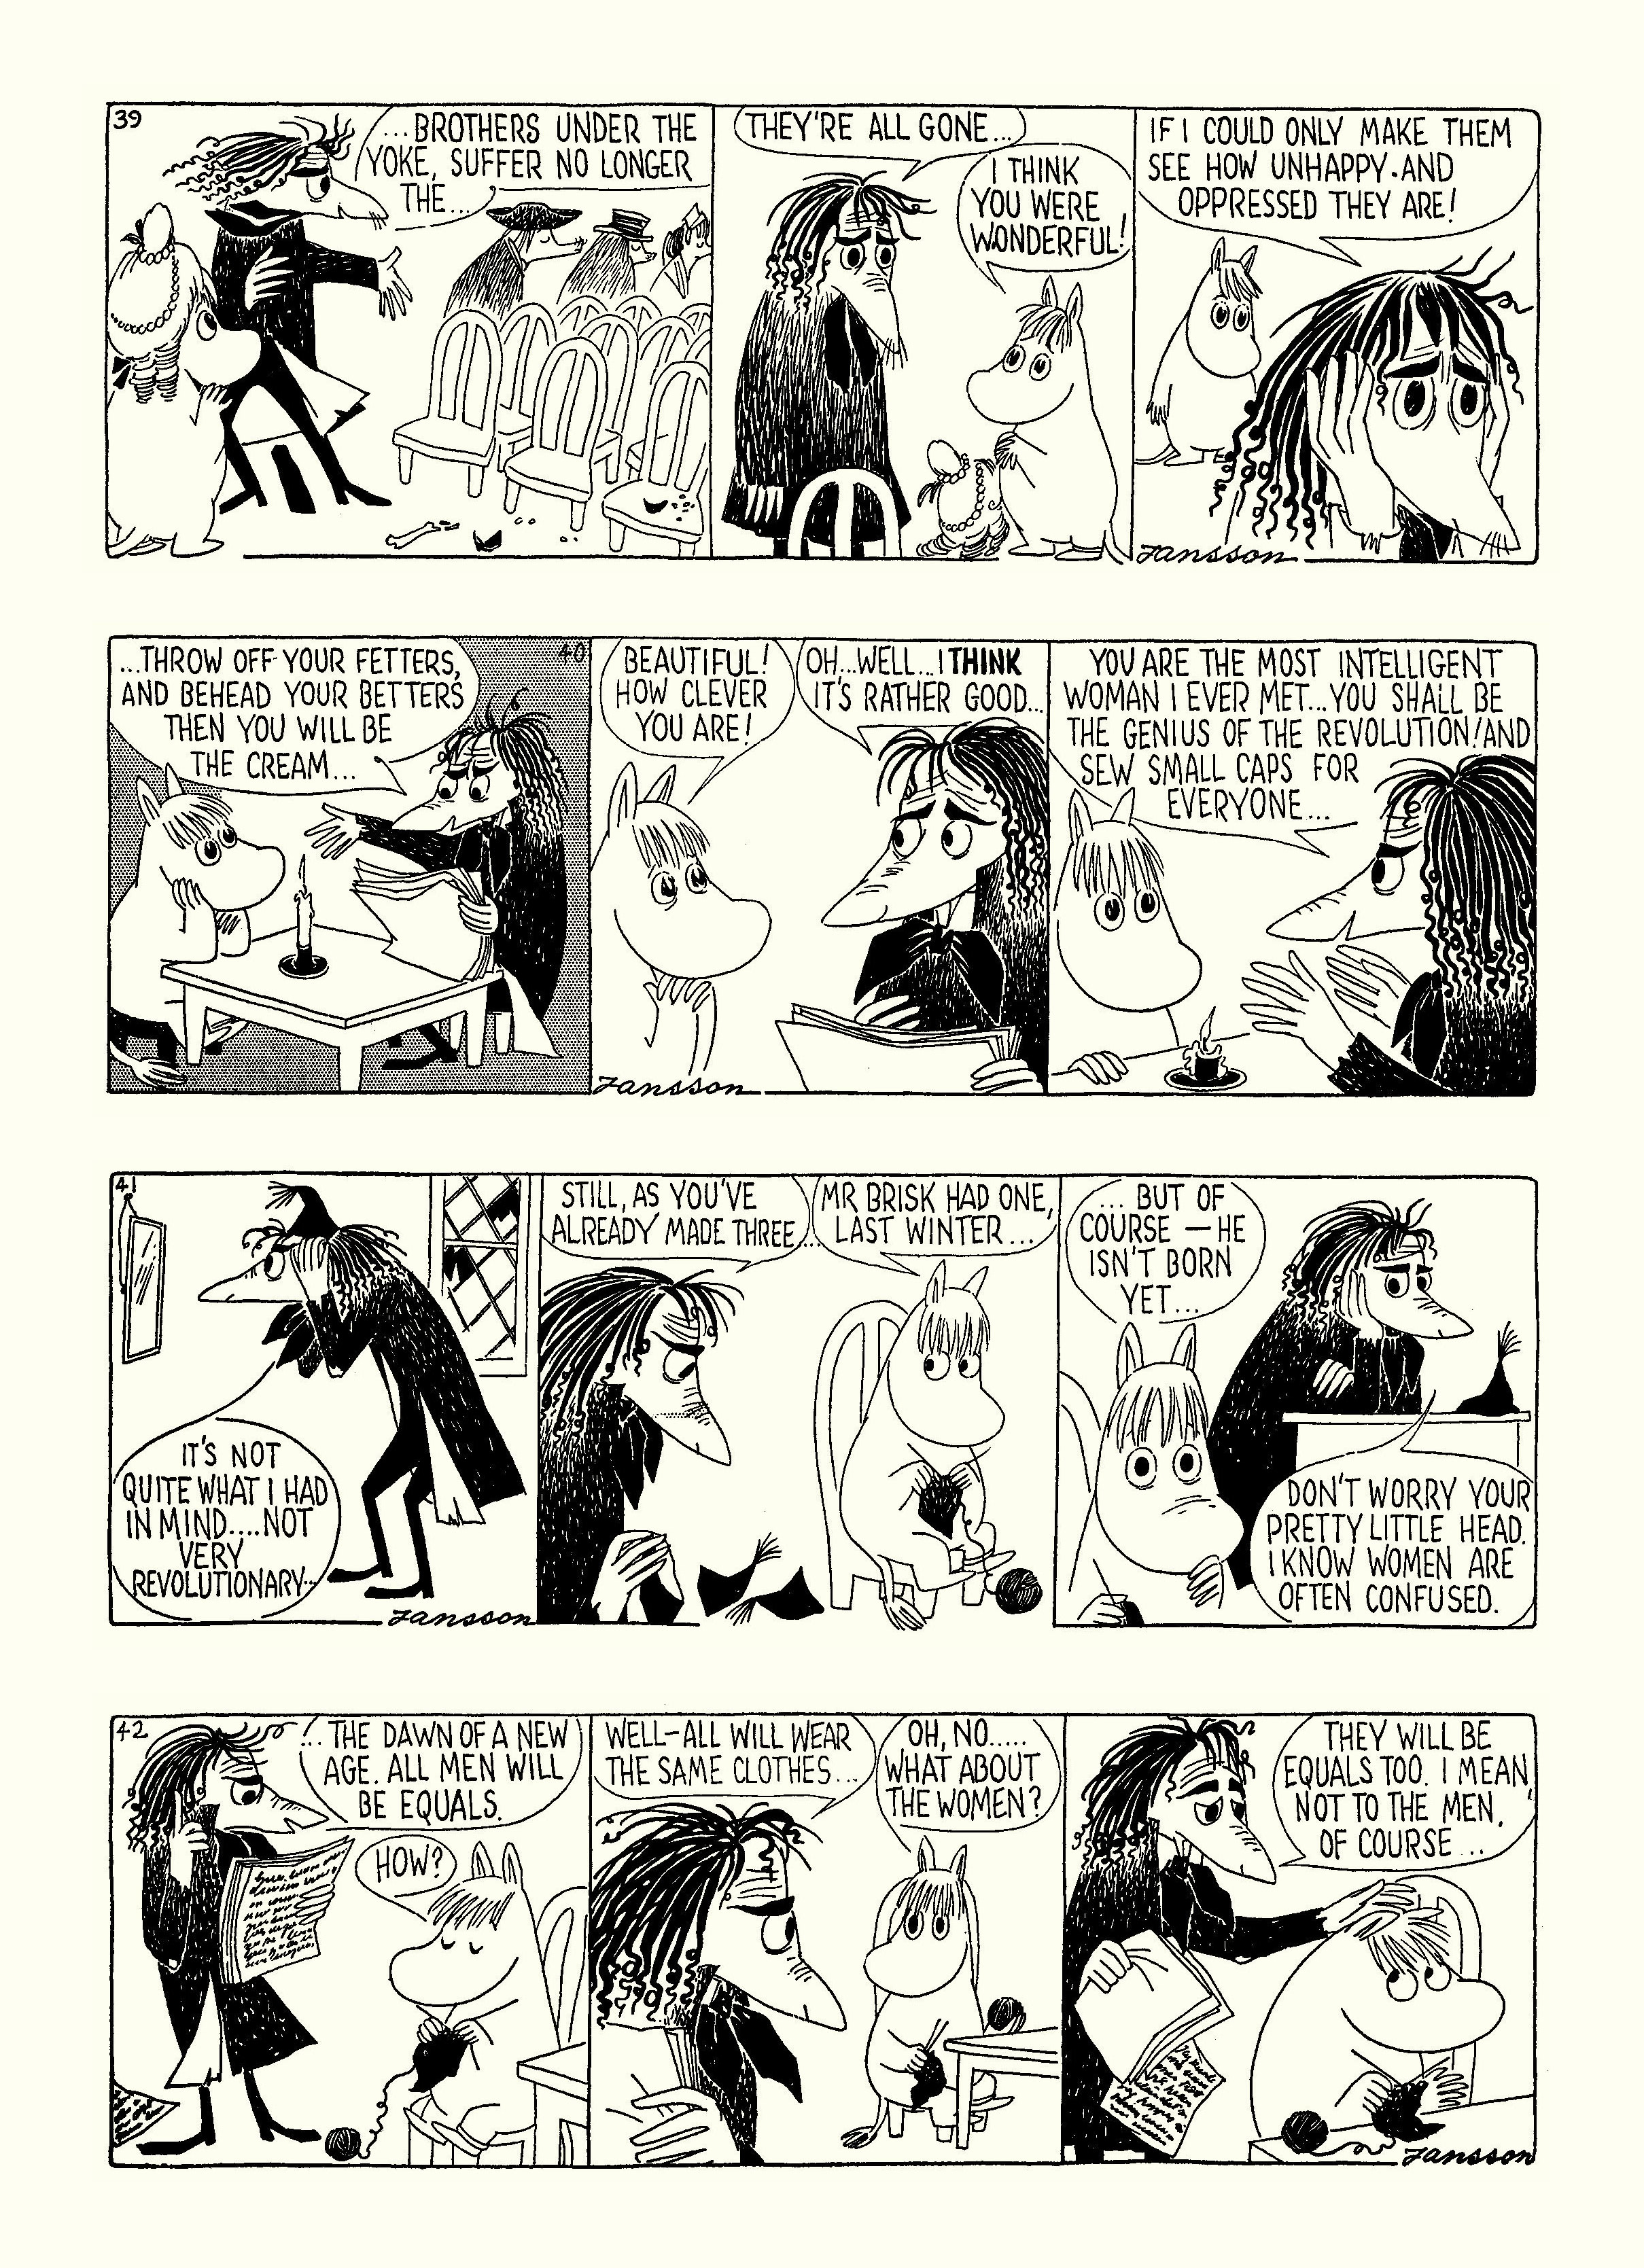 Read online Moomin: The Complete Tove Jansson Comic Strip comic -  Issue # TPB 4 - 33